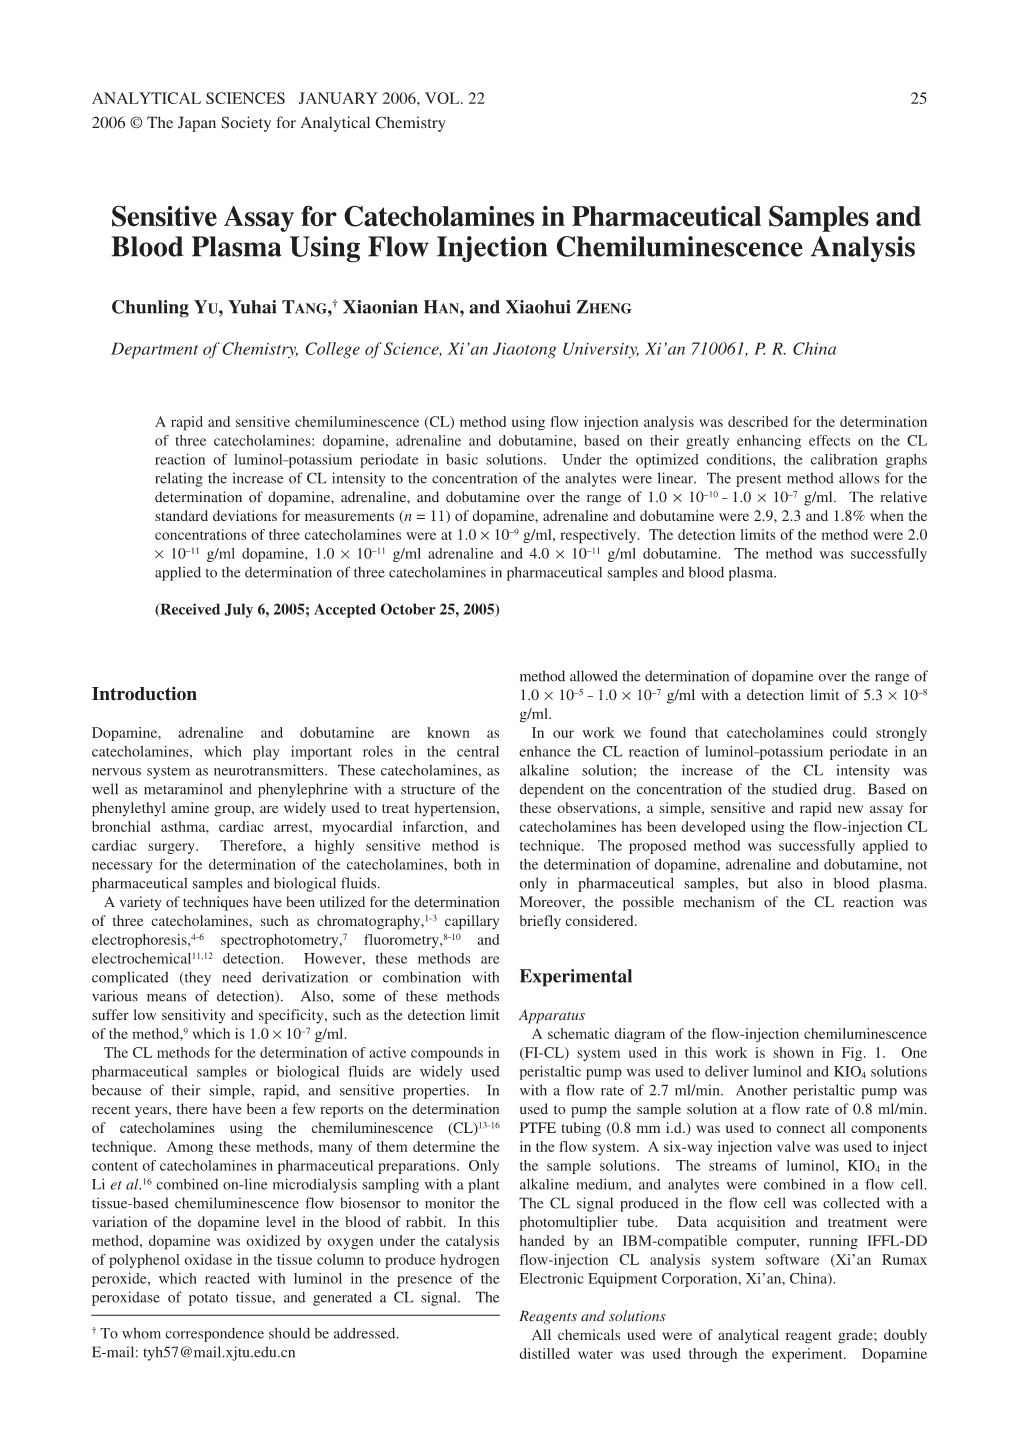 Sensitive Assay for Catecholamines in Pharmaceutical Samples and Blood Plasma Using Flow Injection Chemiluminescence Analysis